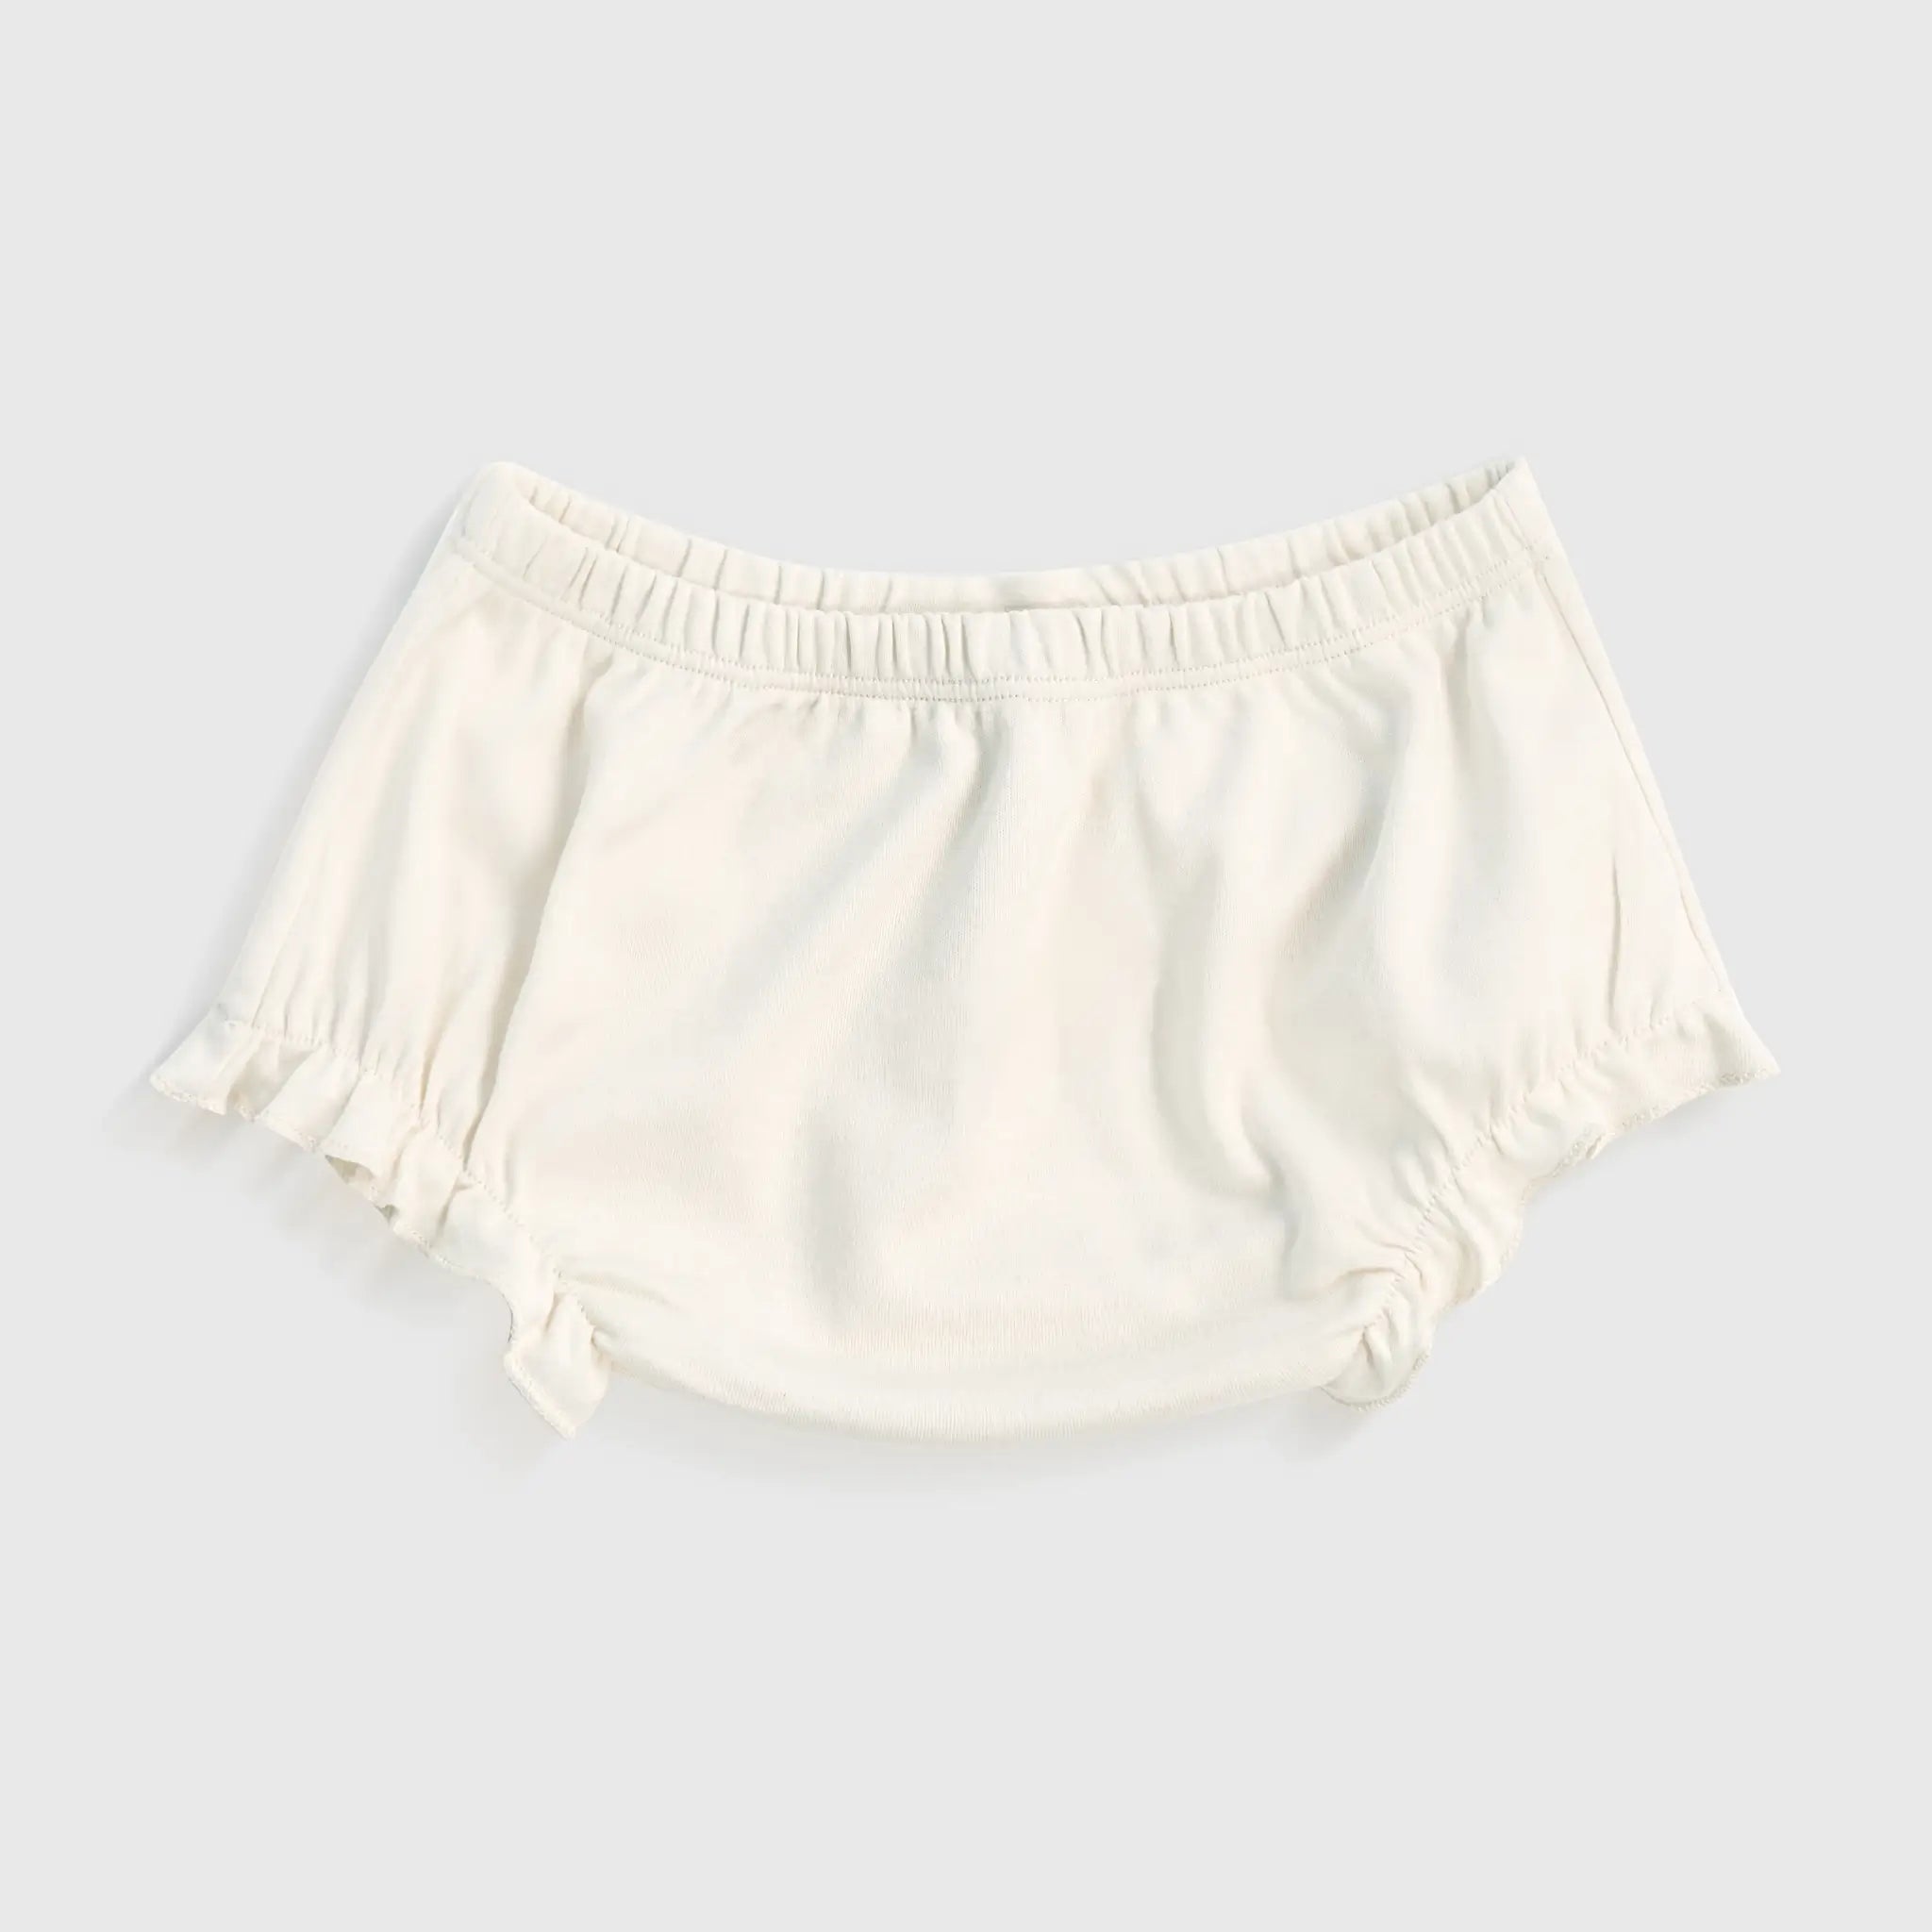 babys ultra soft diaper cover color Undyed